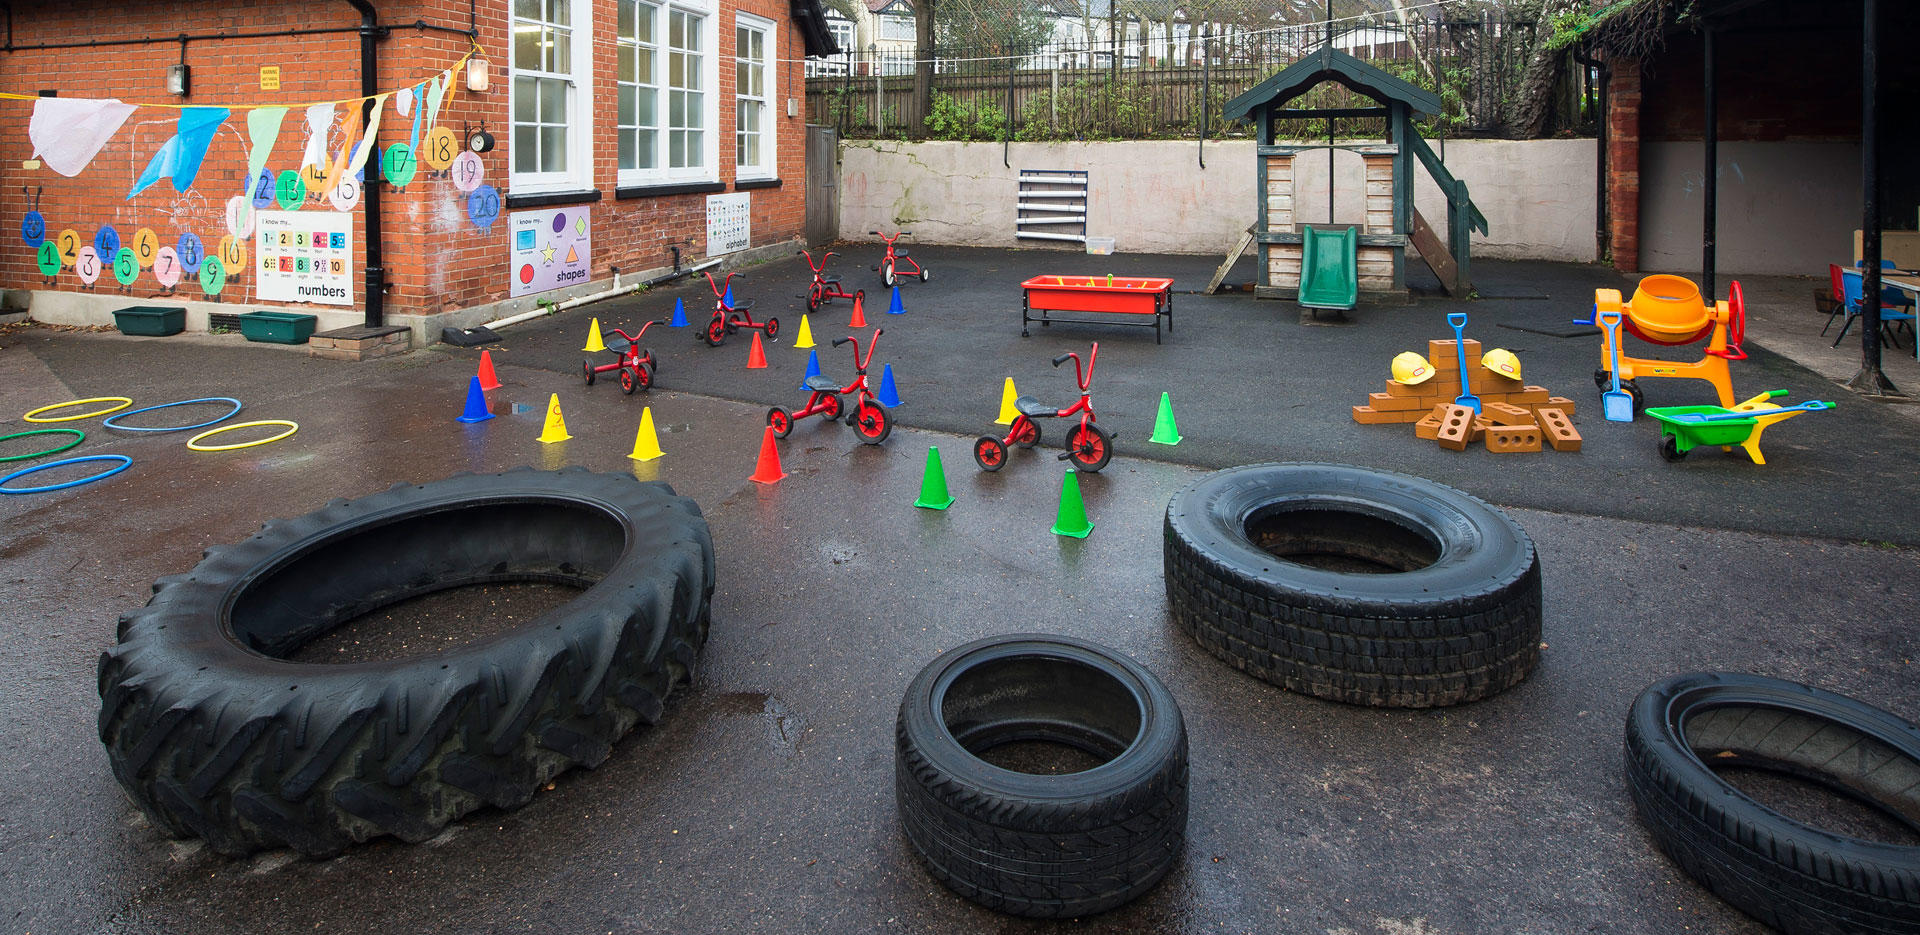 Images Bright Horizons Coulsdon Day Nursery and Preschool